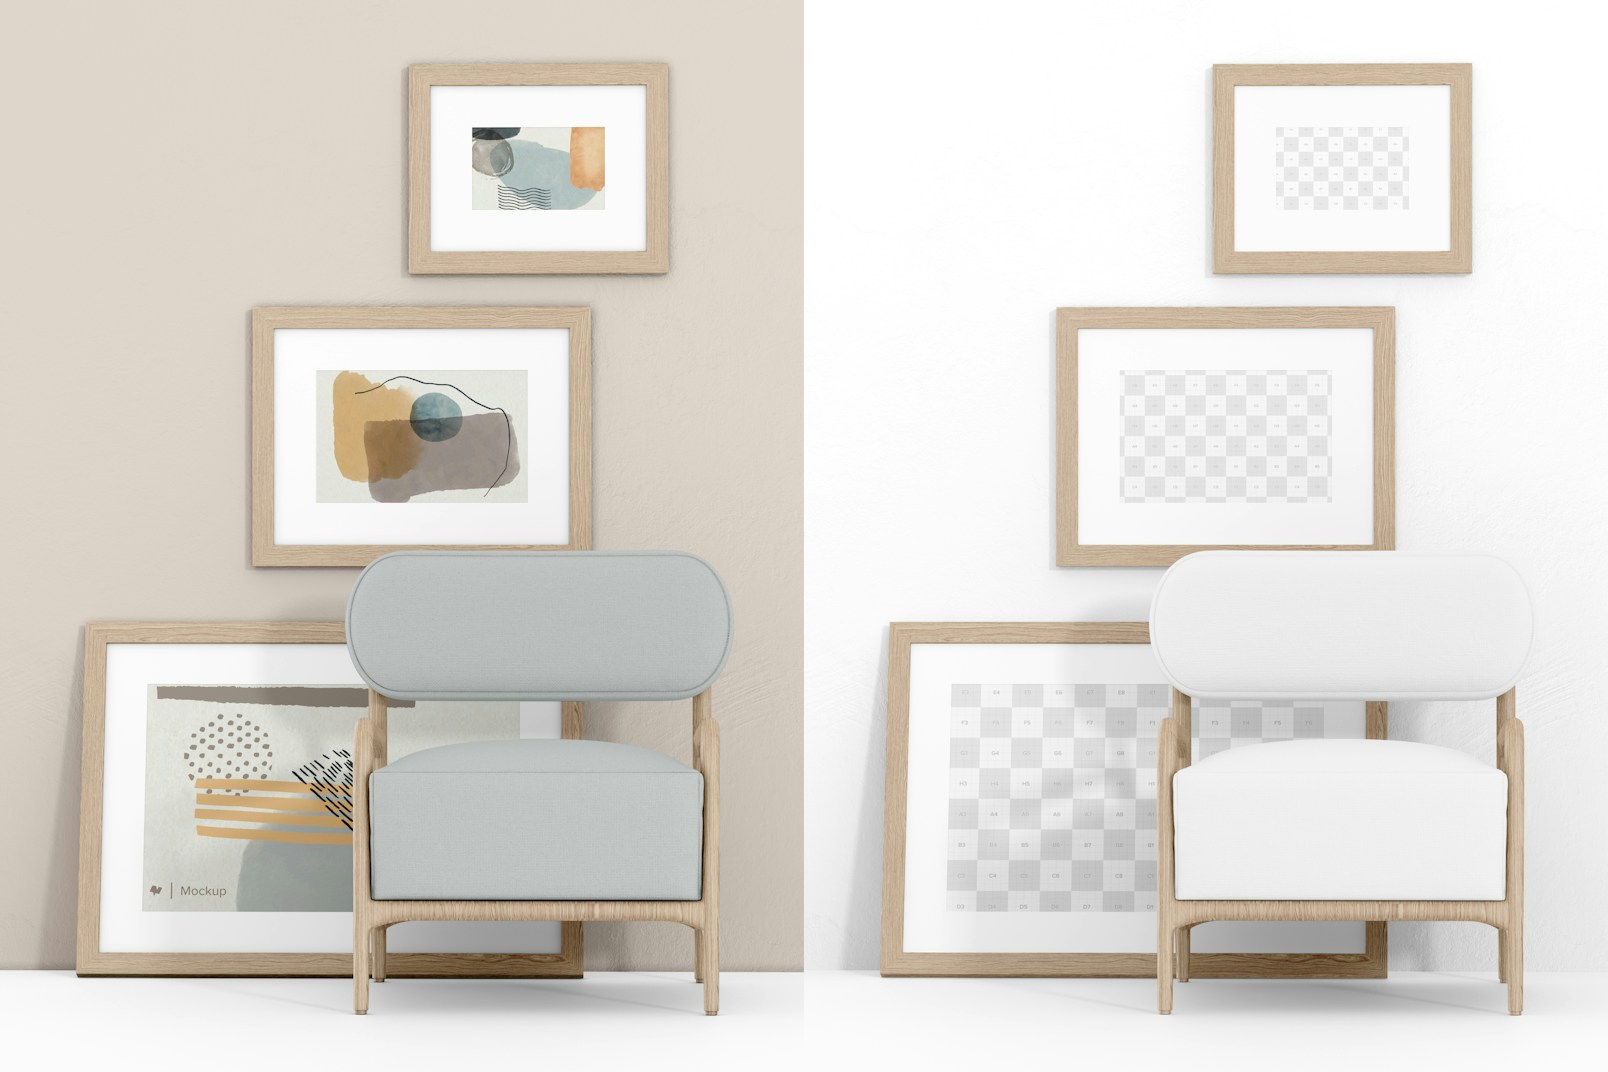 3 Gallery Frames Mockup, with Armchair